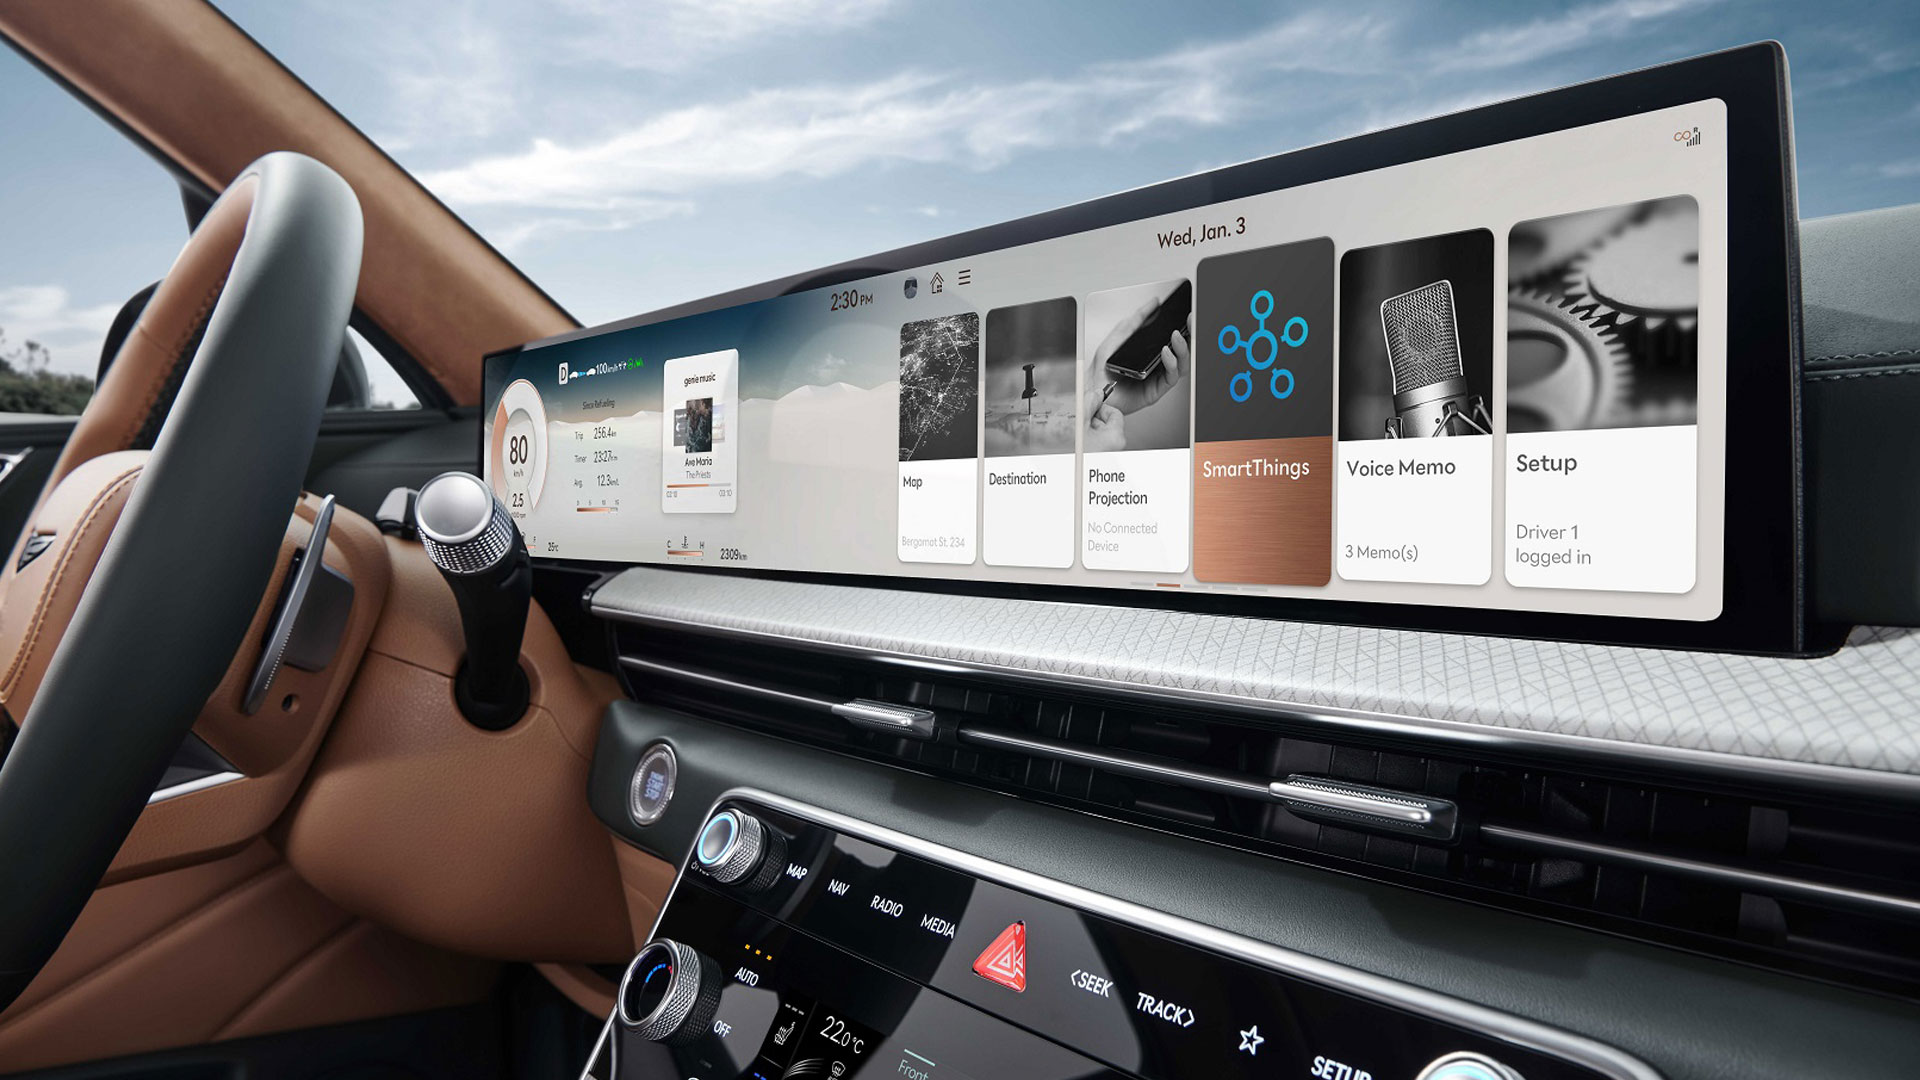 HYUNDAI, KIA AND SAMSUNG ELECTRONICS TO COLLABORATE ON CONNECTING MOBILITY AND RESIDENTIAL SPACES